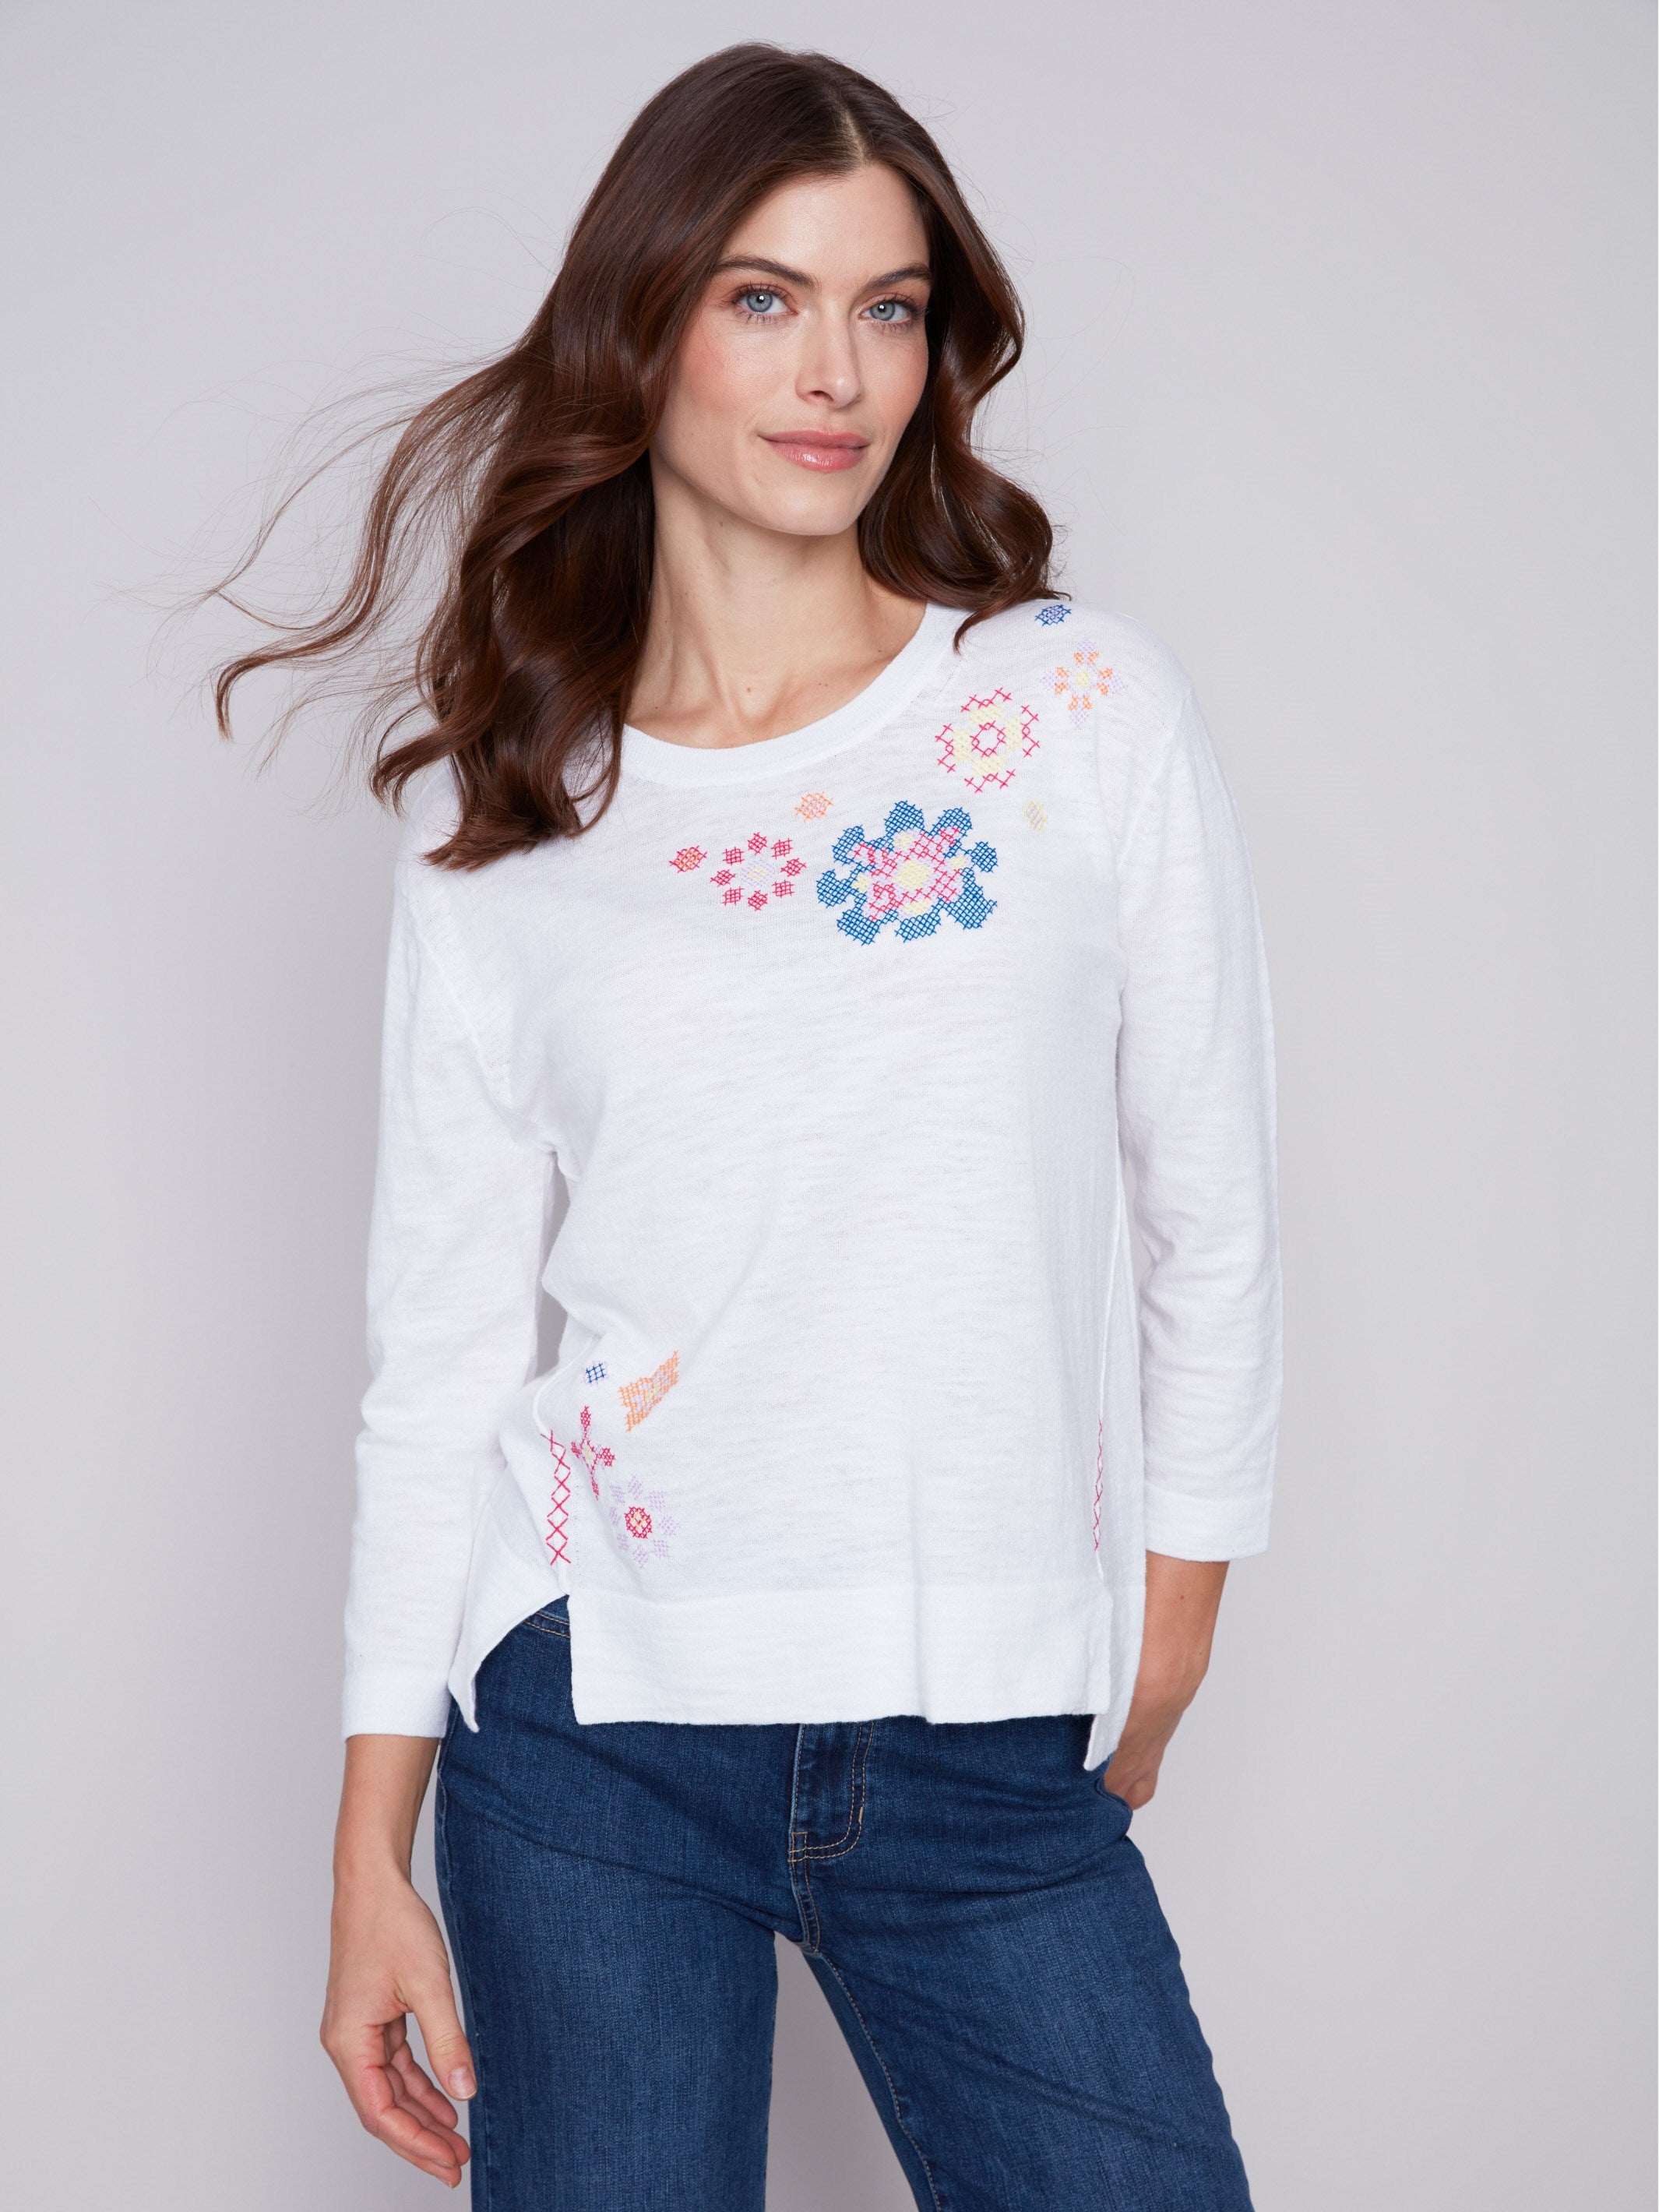 Cotton Sweater With Flower Embroidery - White - Charlie B Collection Canada - Image 4